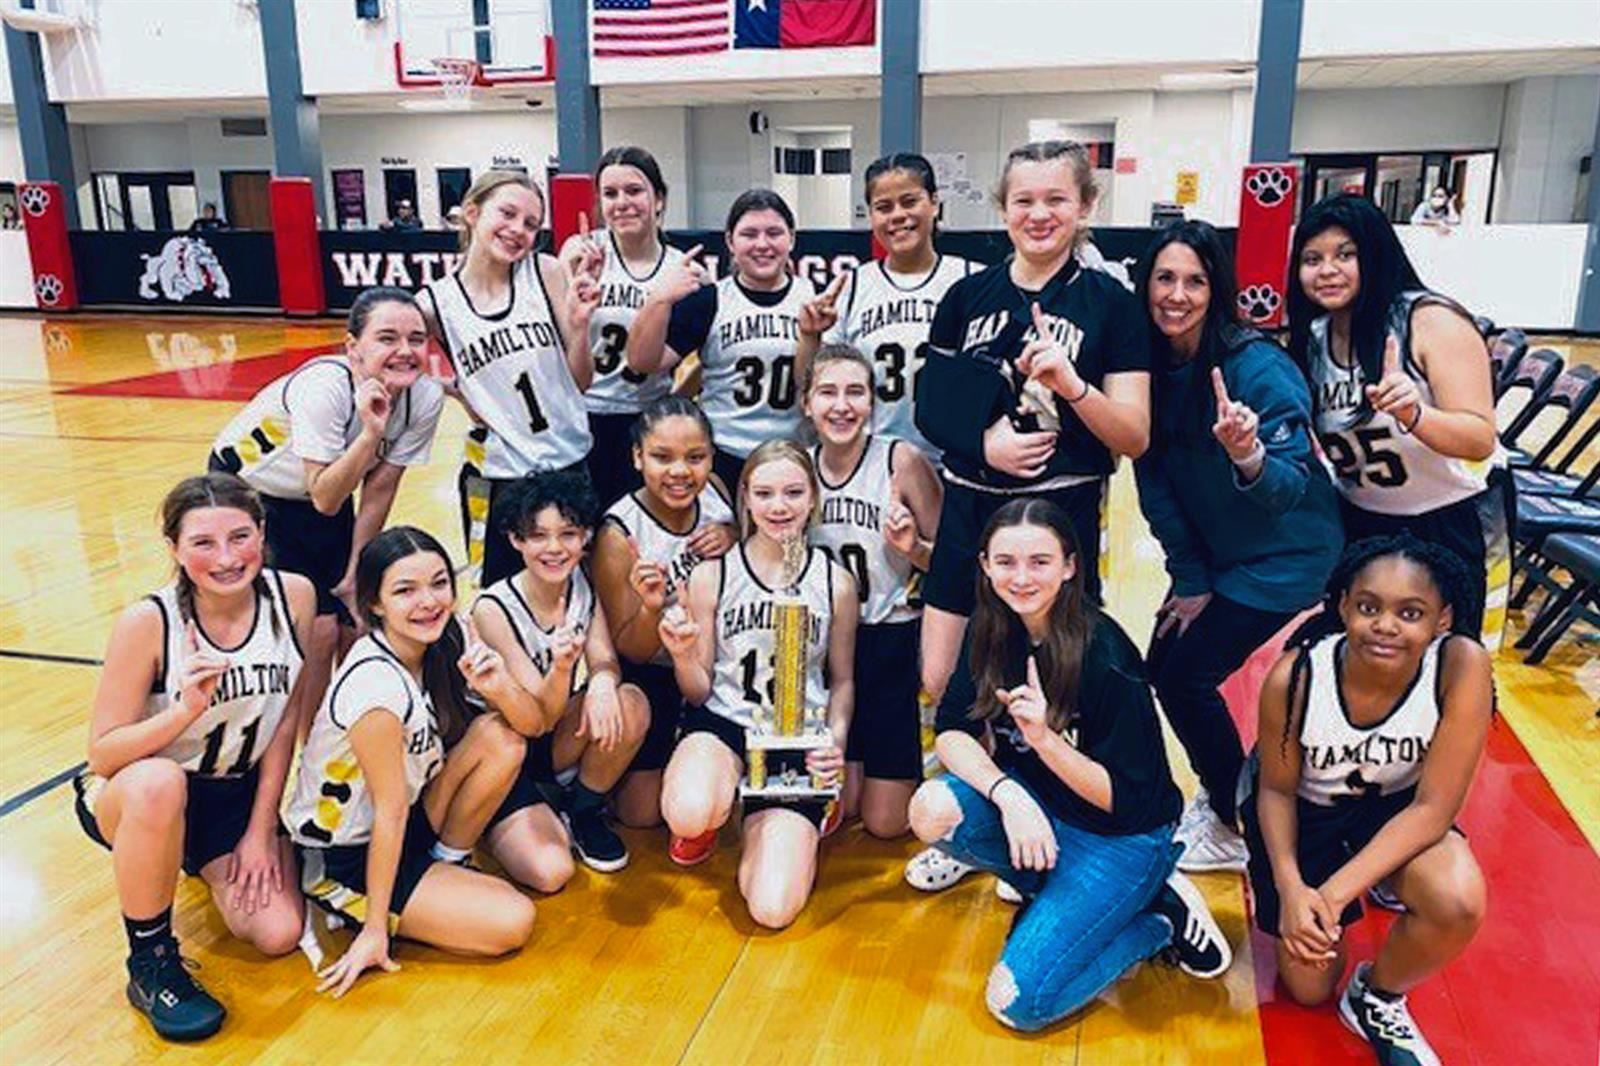 The Hamilton Tigers’ seventh grade B team won the East Division girls’ basketball crown with an 6-0 record.